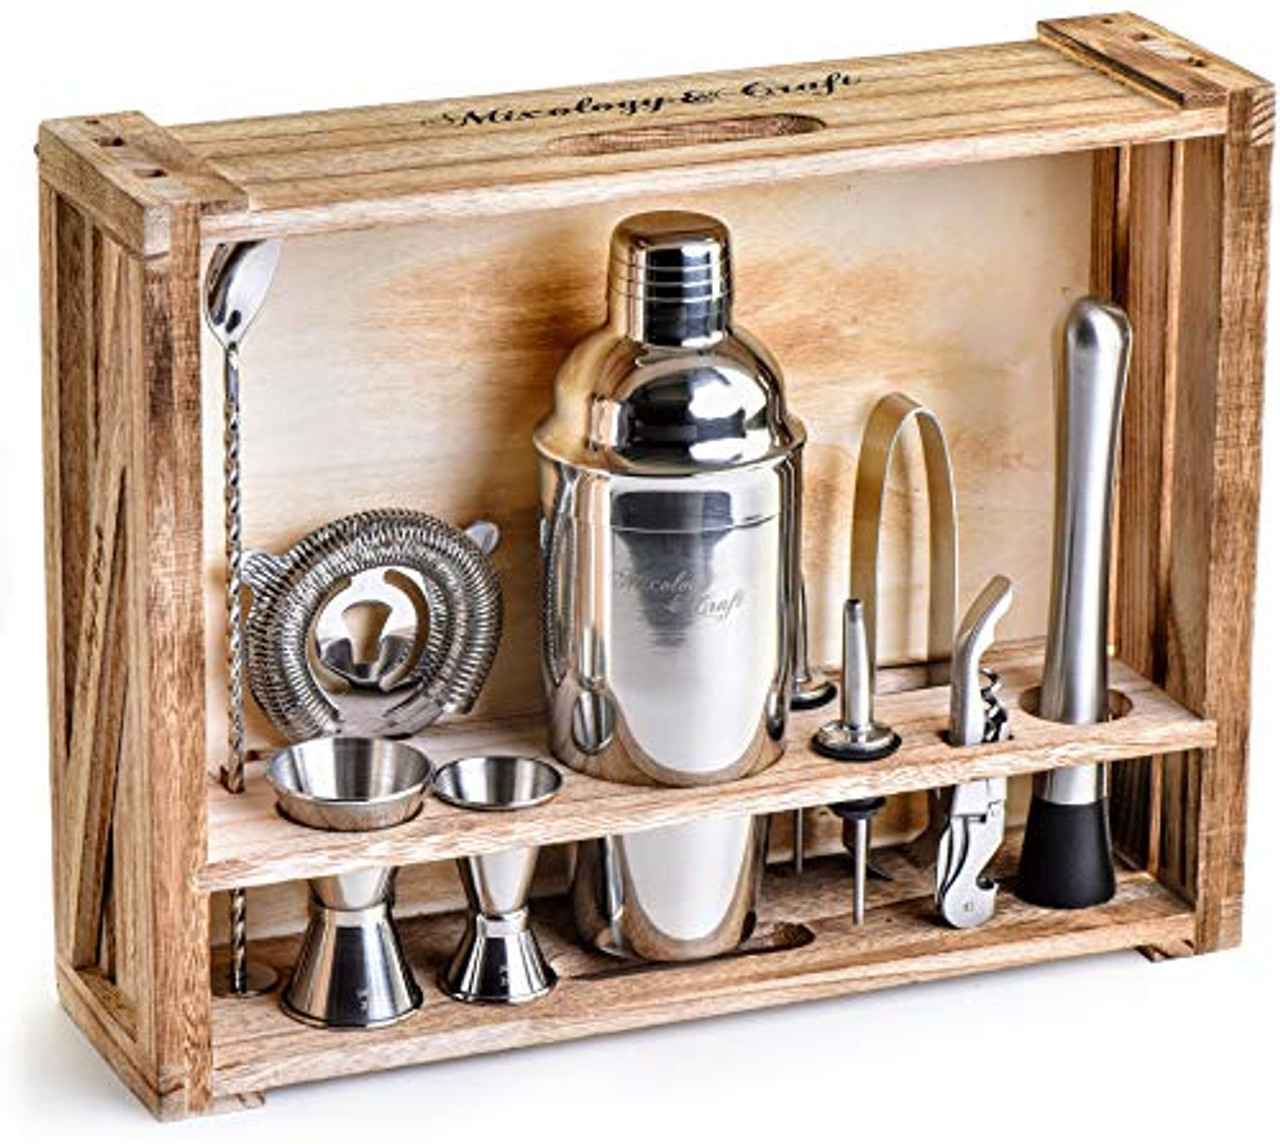 Bartender Kit: 11-Piece Bar Tool Set Rustic Wood - Perfect Home Bartending and Cocktail Shaker Set For an Awesome Drink Mixing Experience